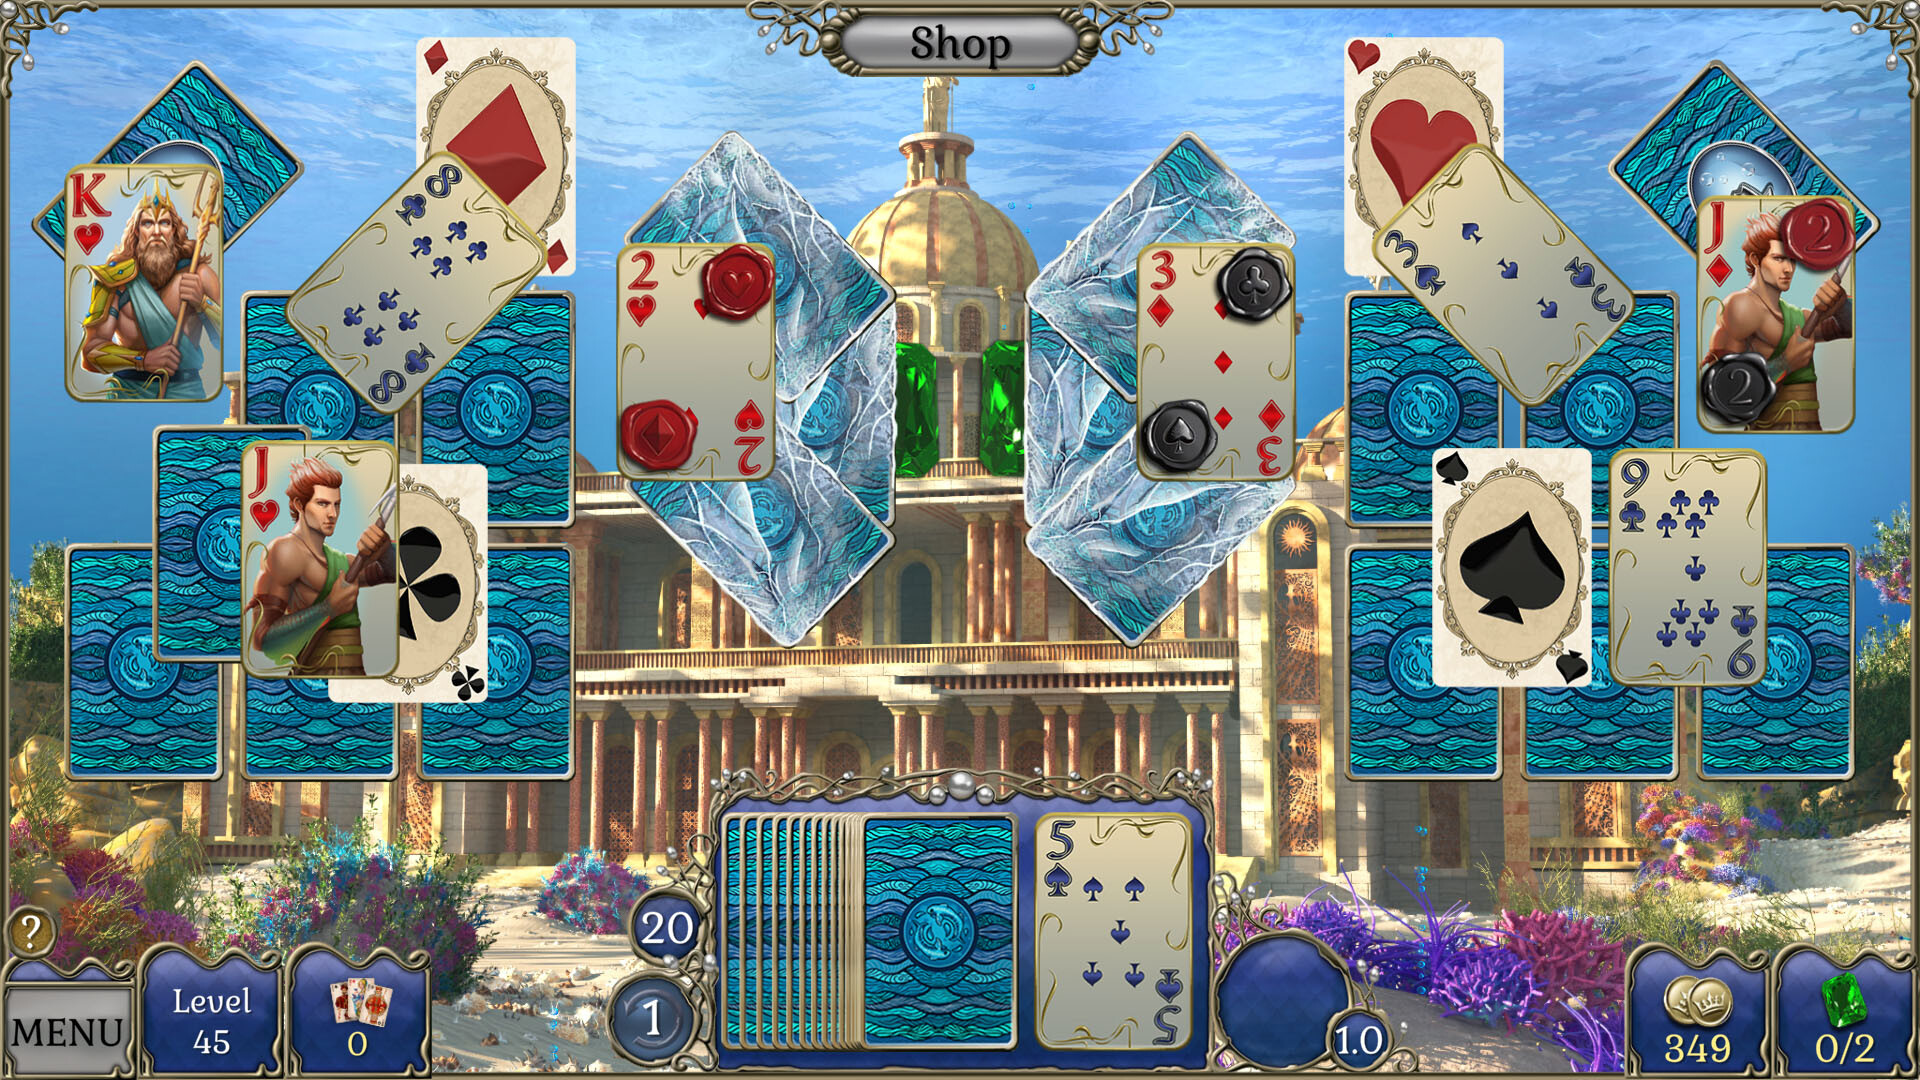 [$ 6.71] Jewel Match Atlantis Solitaire 4 Collector's Edition Steam CD Key